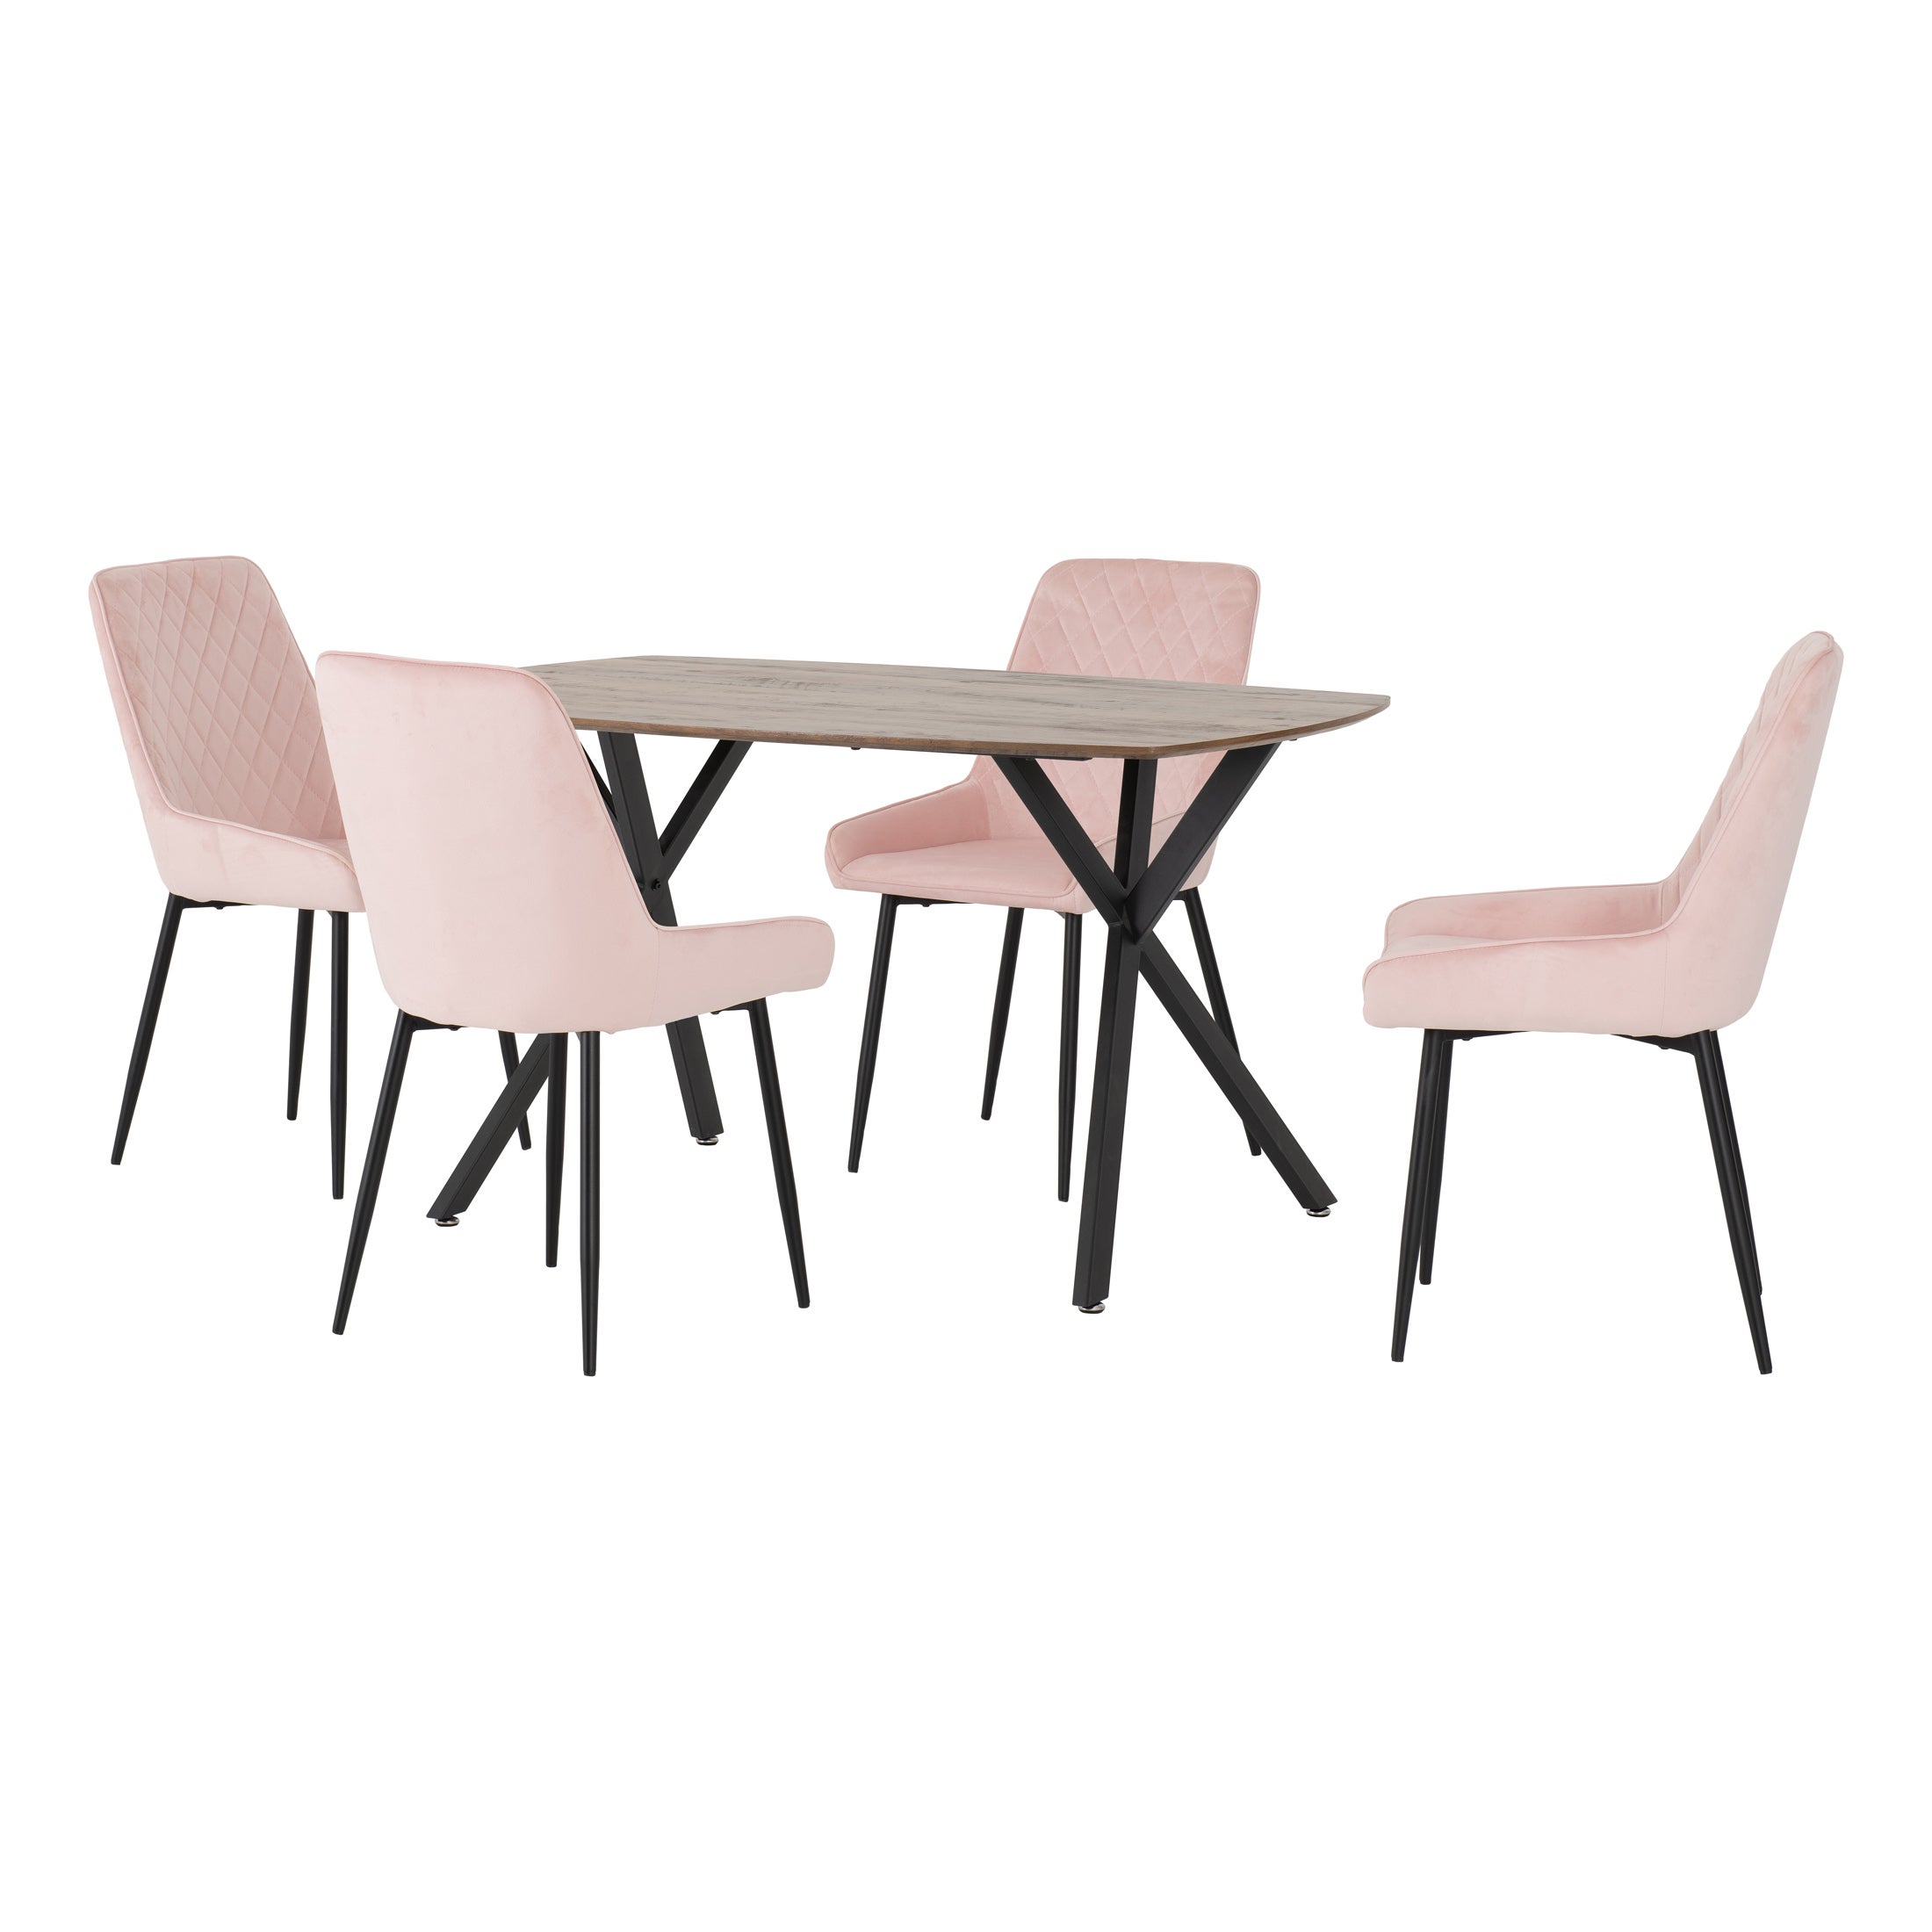 Athens Rectangular Dining Table With 4 Avery Chairs Oak Effect Pink